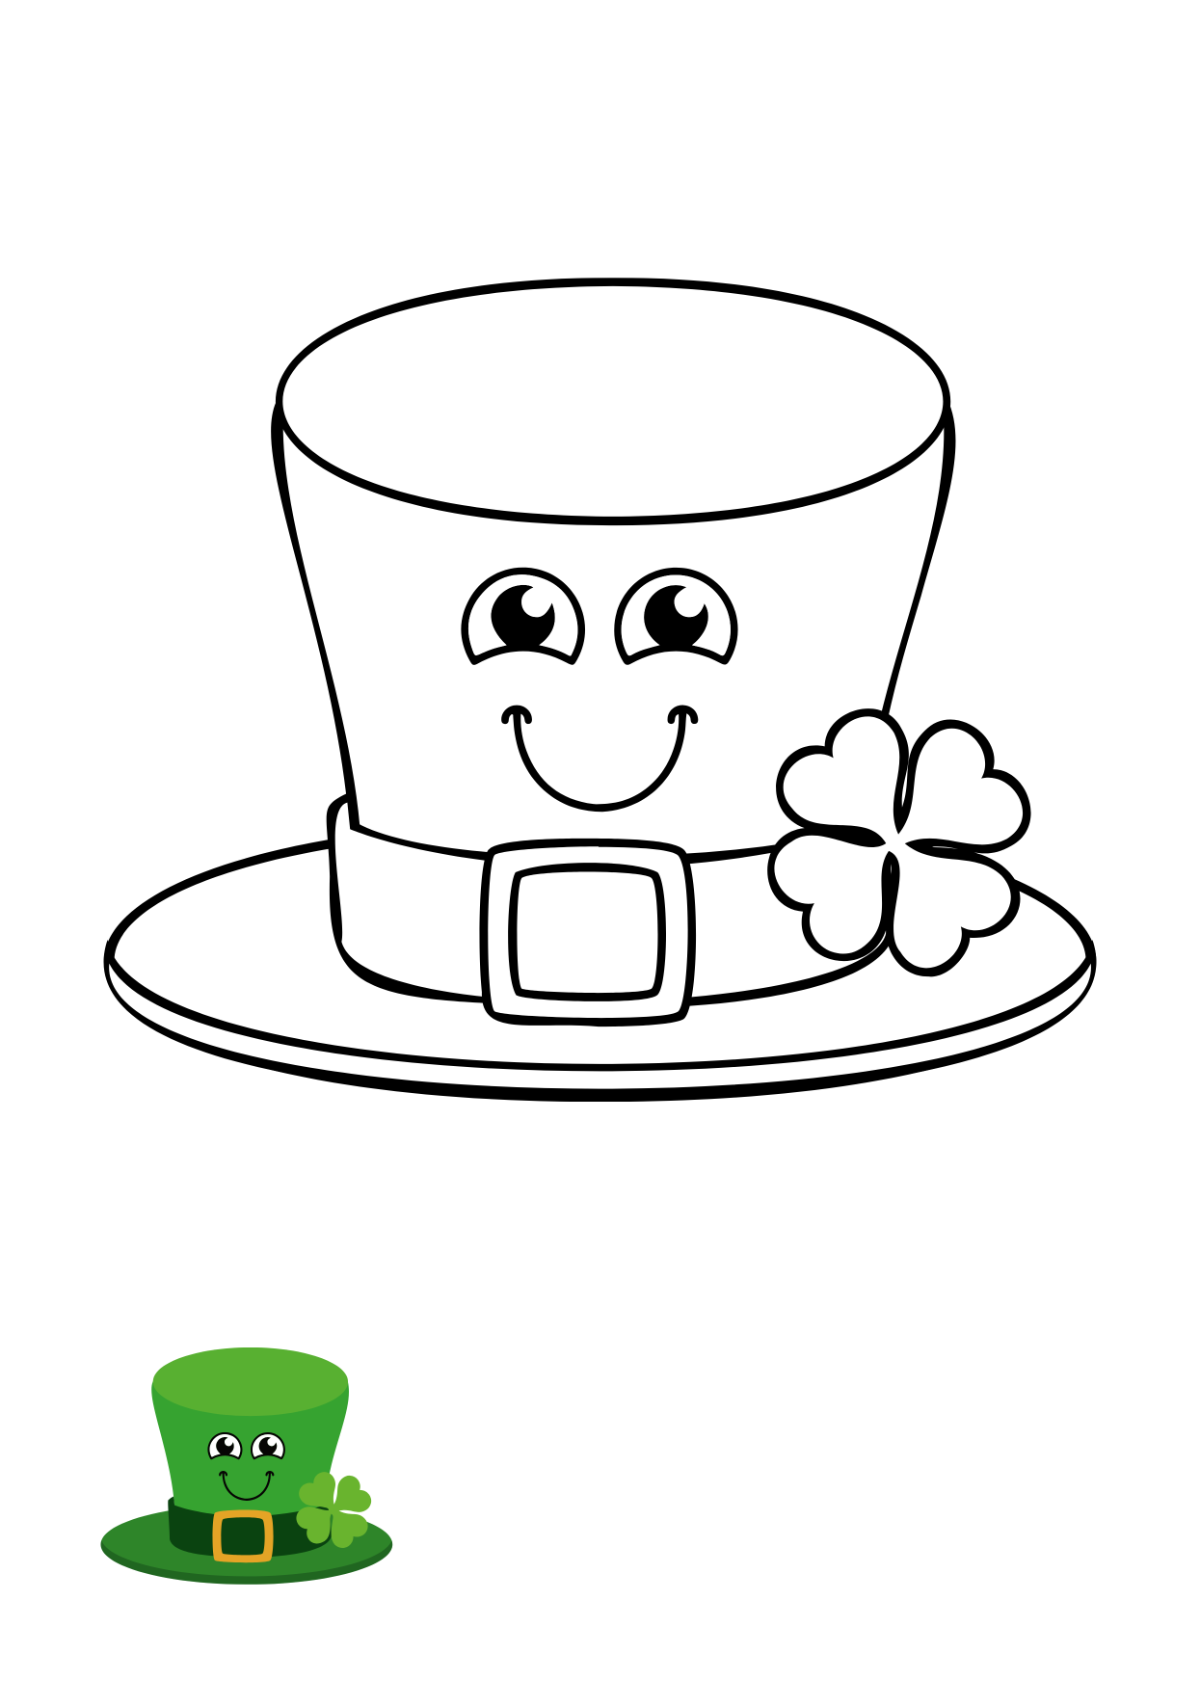 Easy St. Patrick’s Day Coloring Page Template